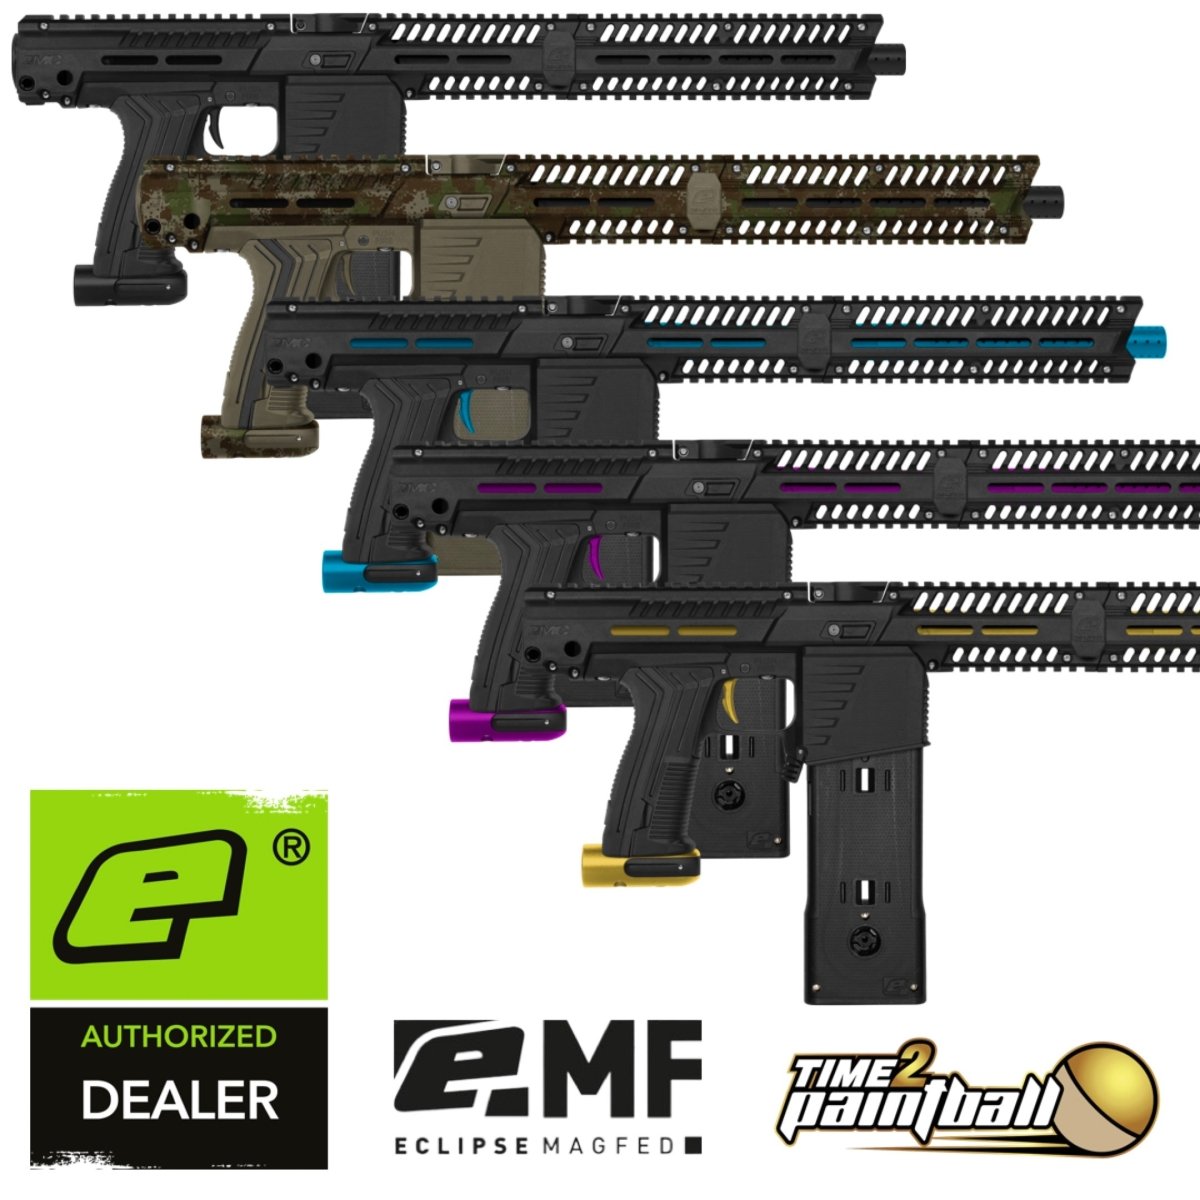 Planet Eclipse EMF100 - Time 2 Paintball